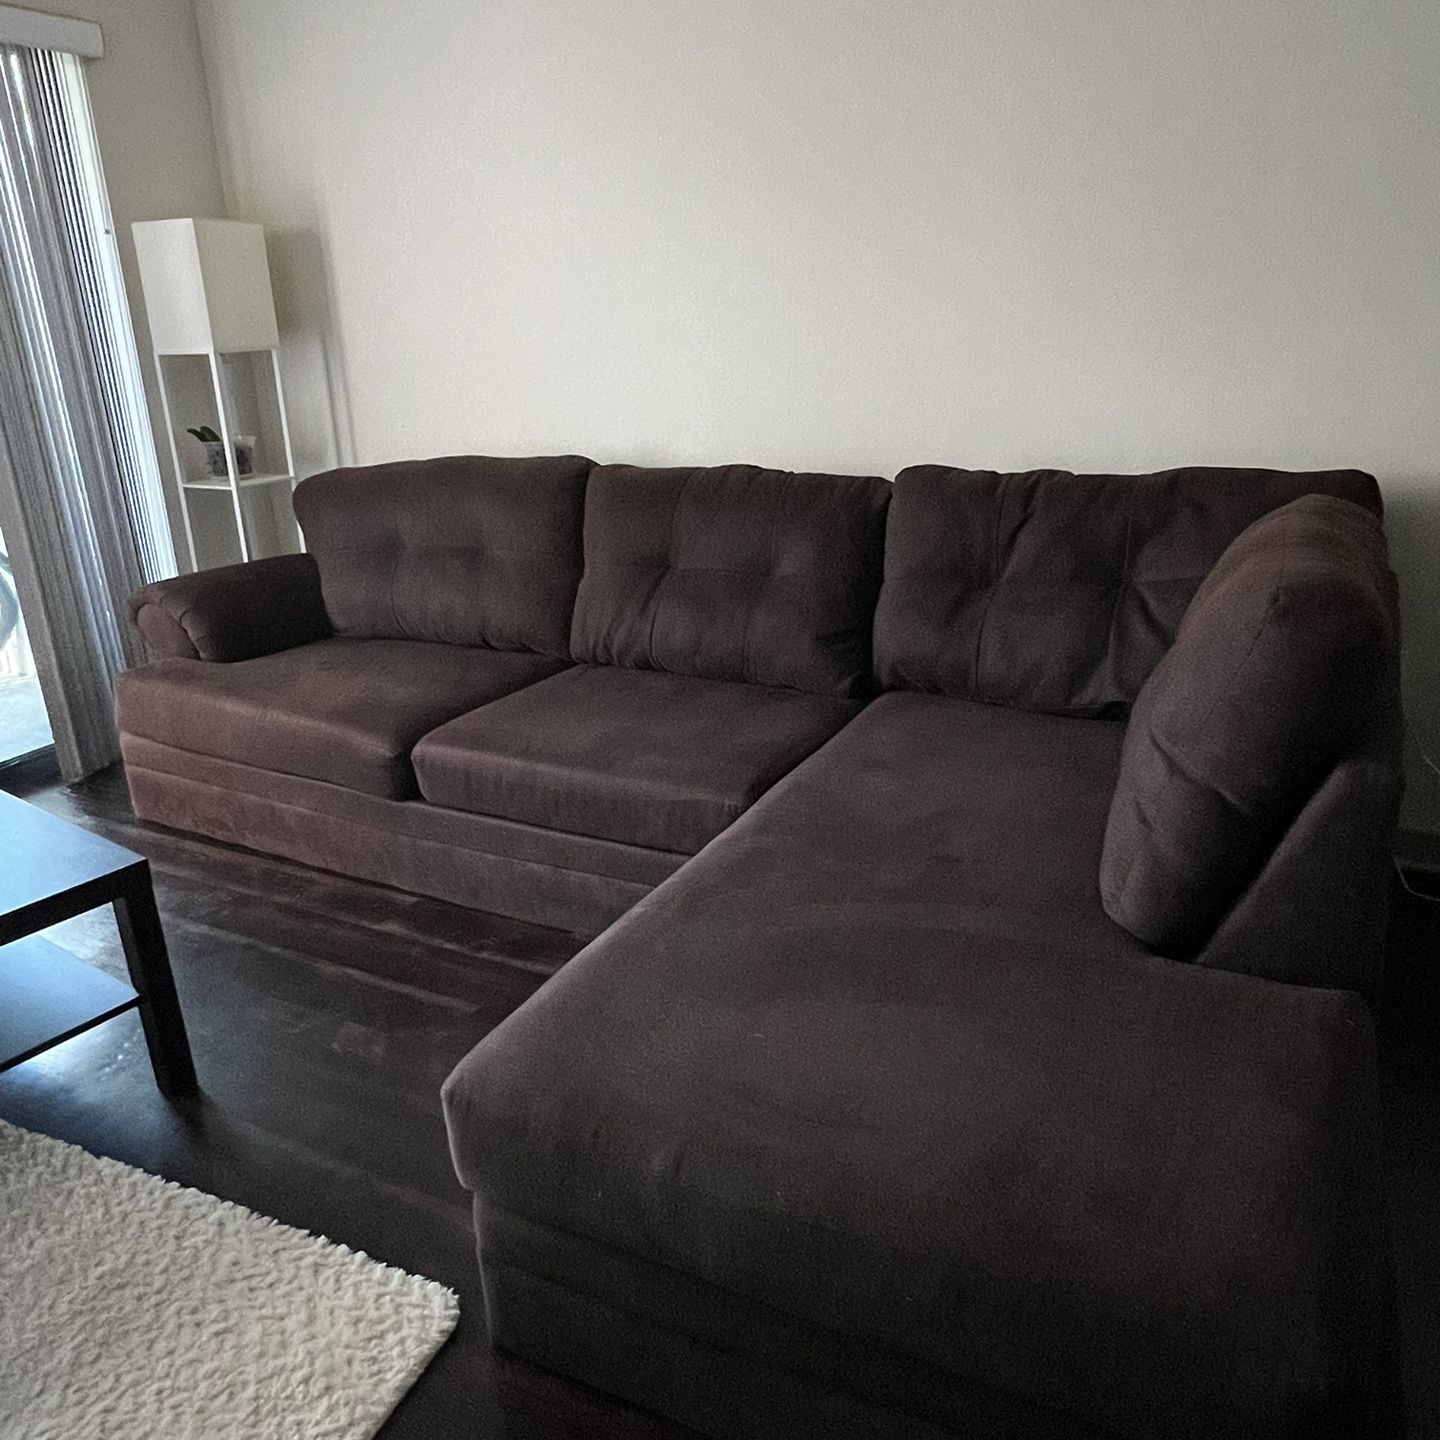  Big Corner Couch Chocolate color